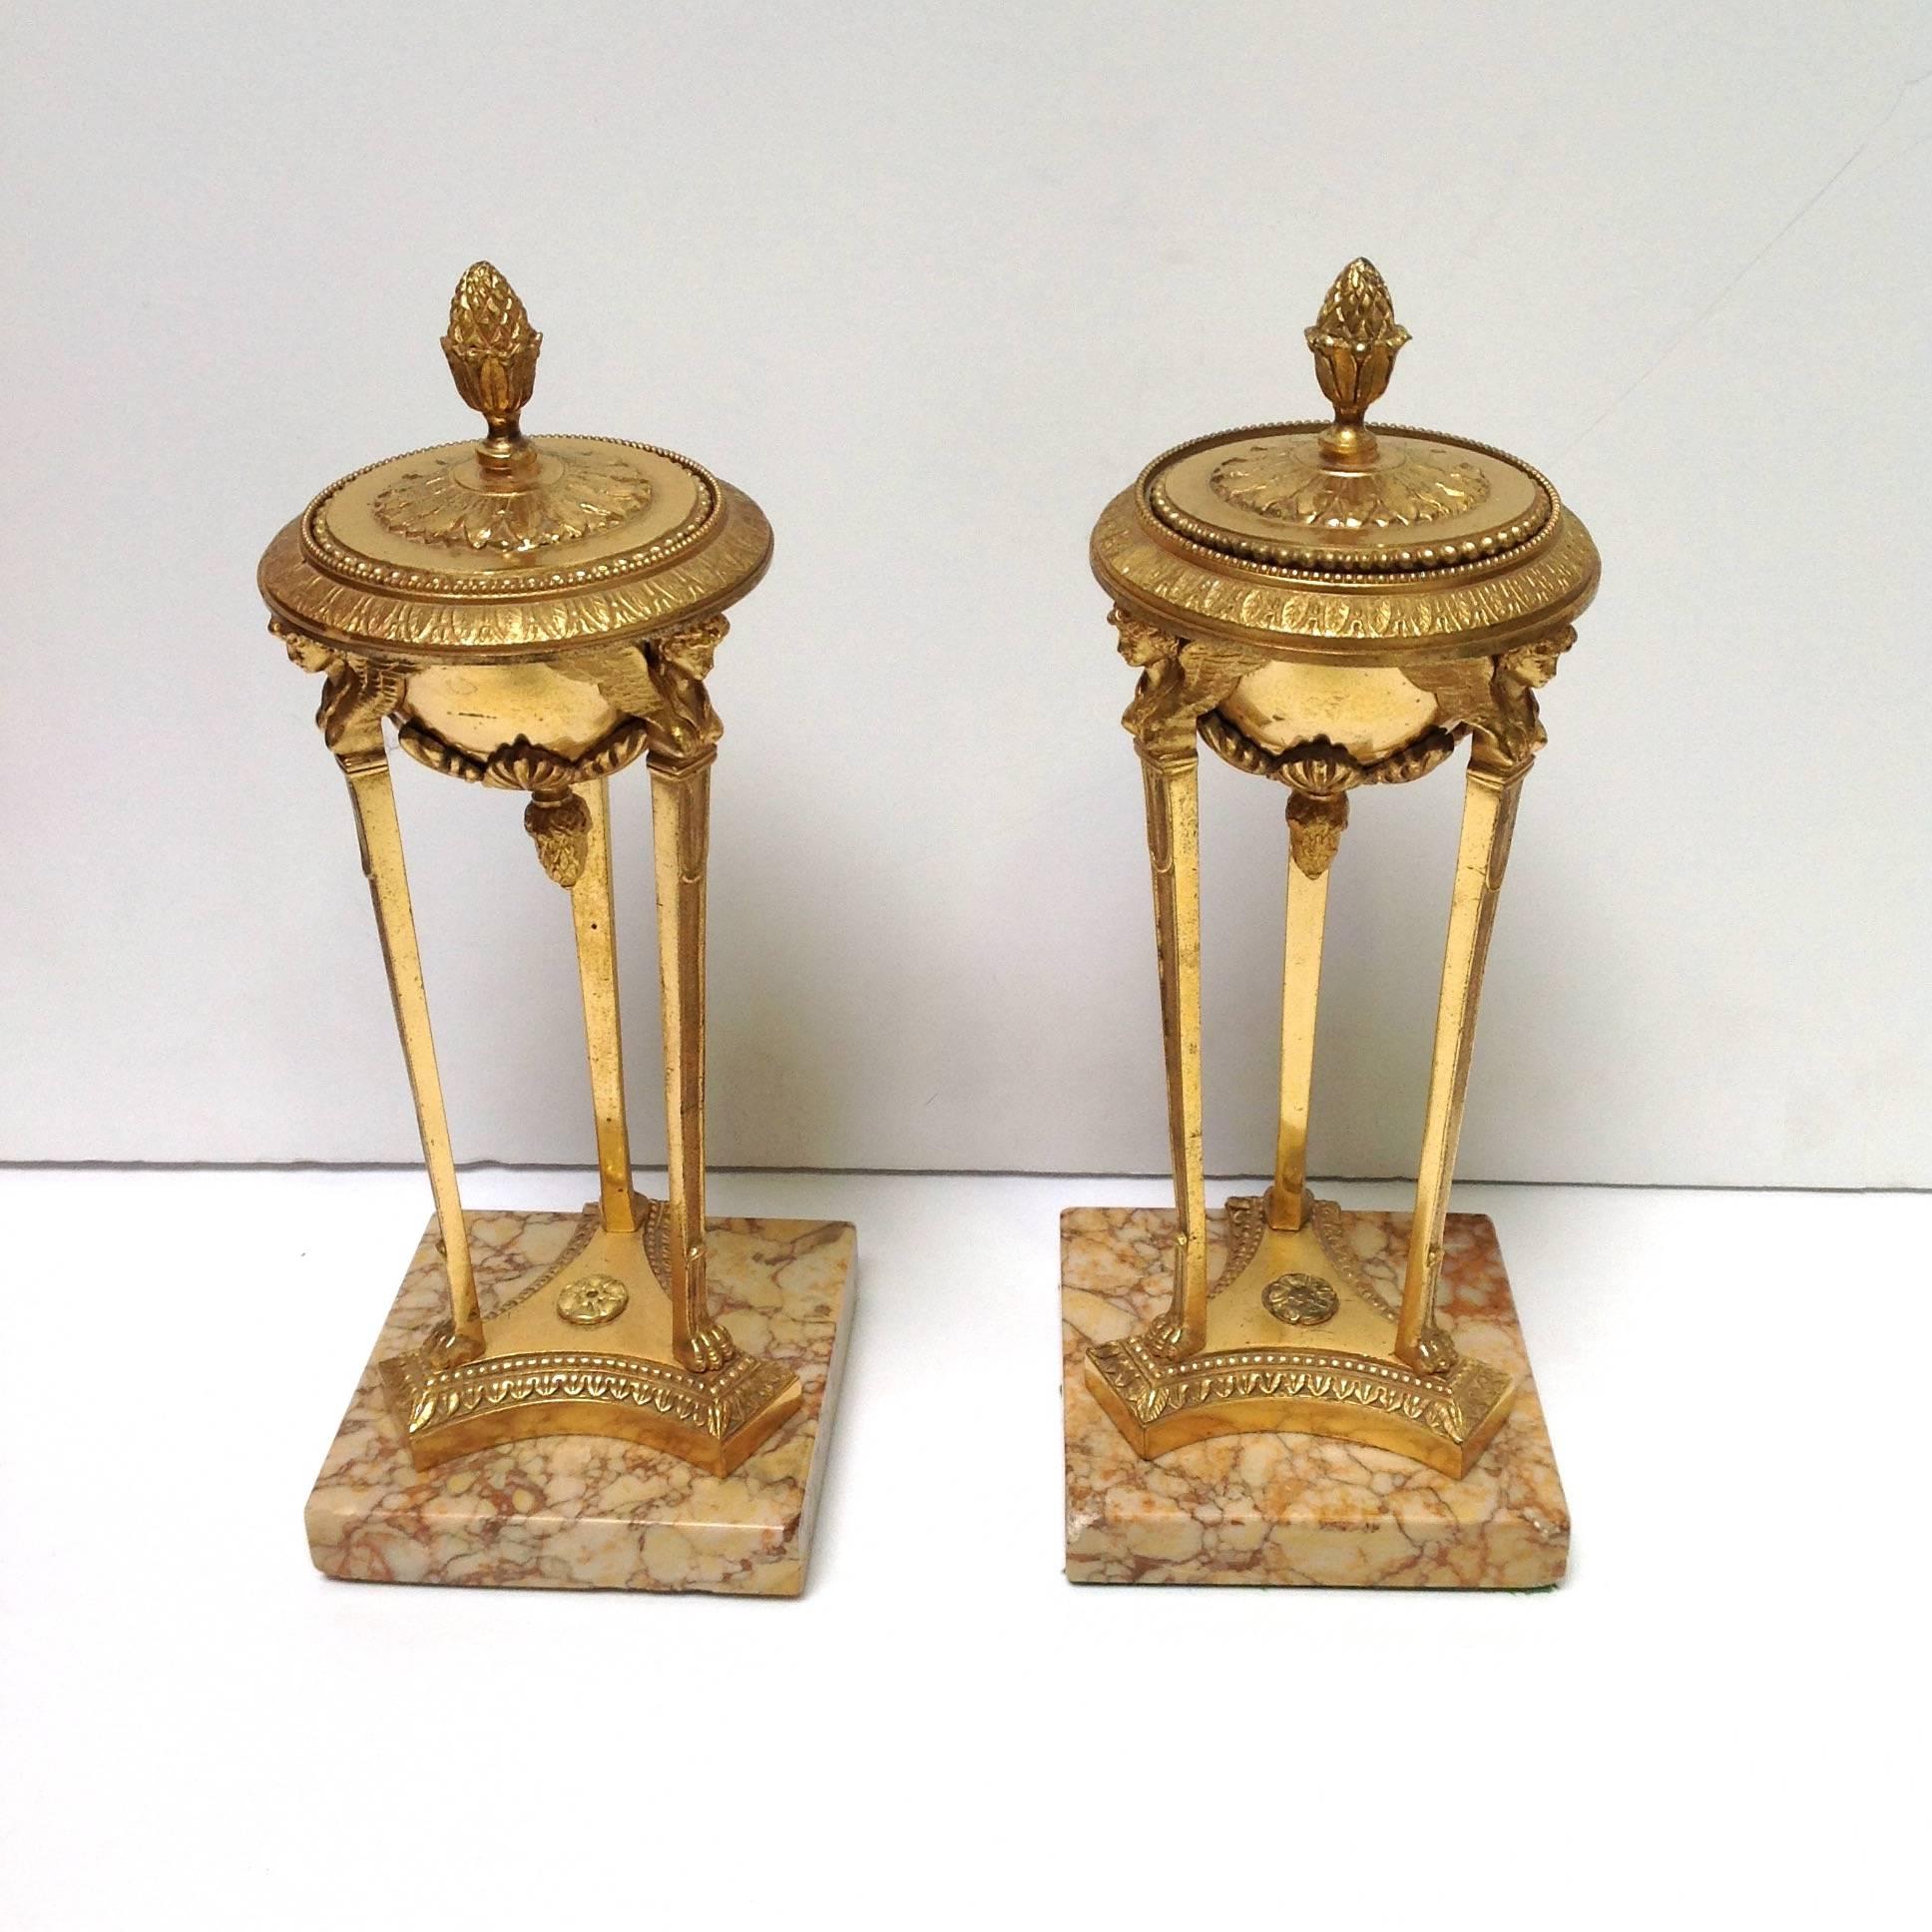 Empire Period Gilt Bronze Sienna Marble Atheniennes or Candlesticks For Sale 3